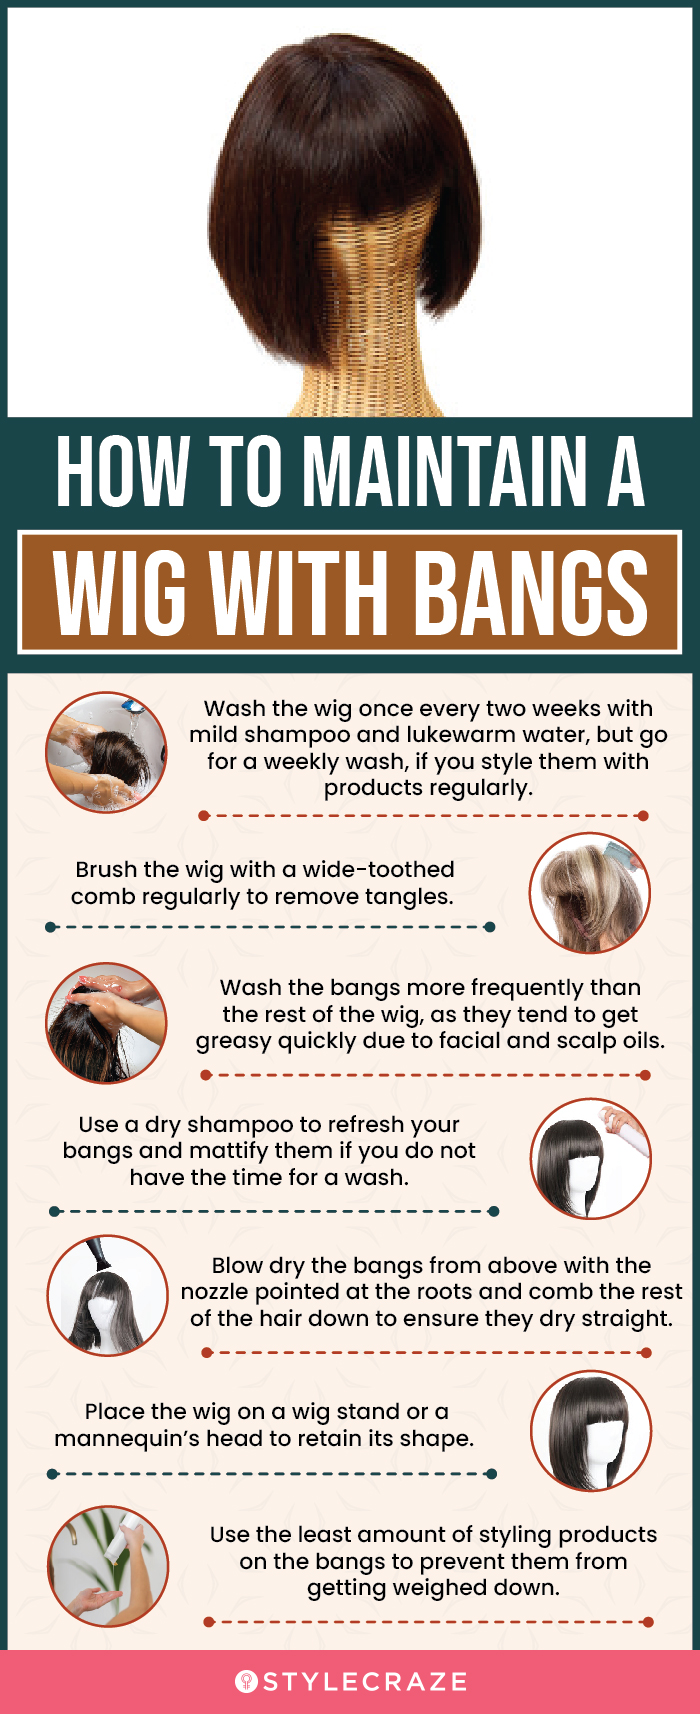 How To Maintain A Wig With Bangs (infographic)